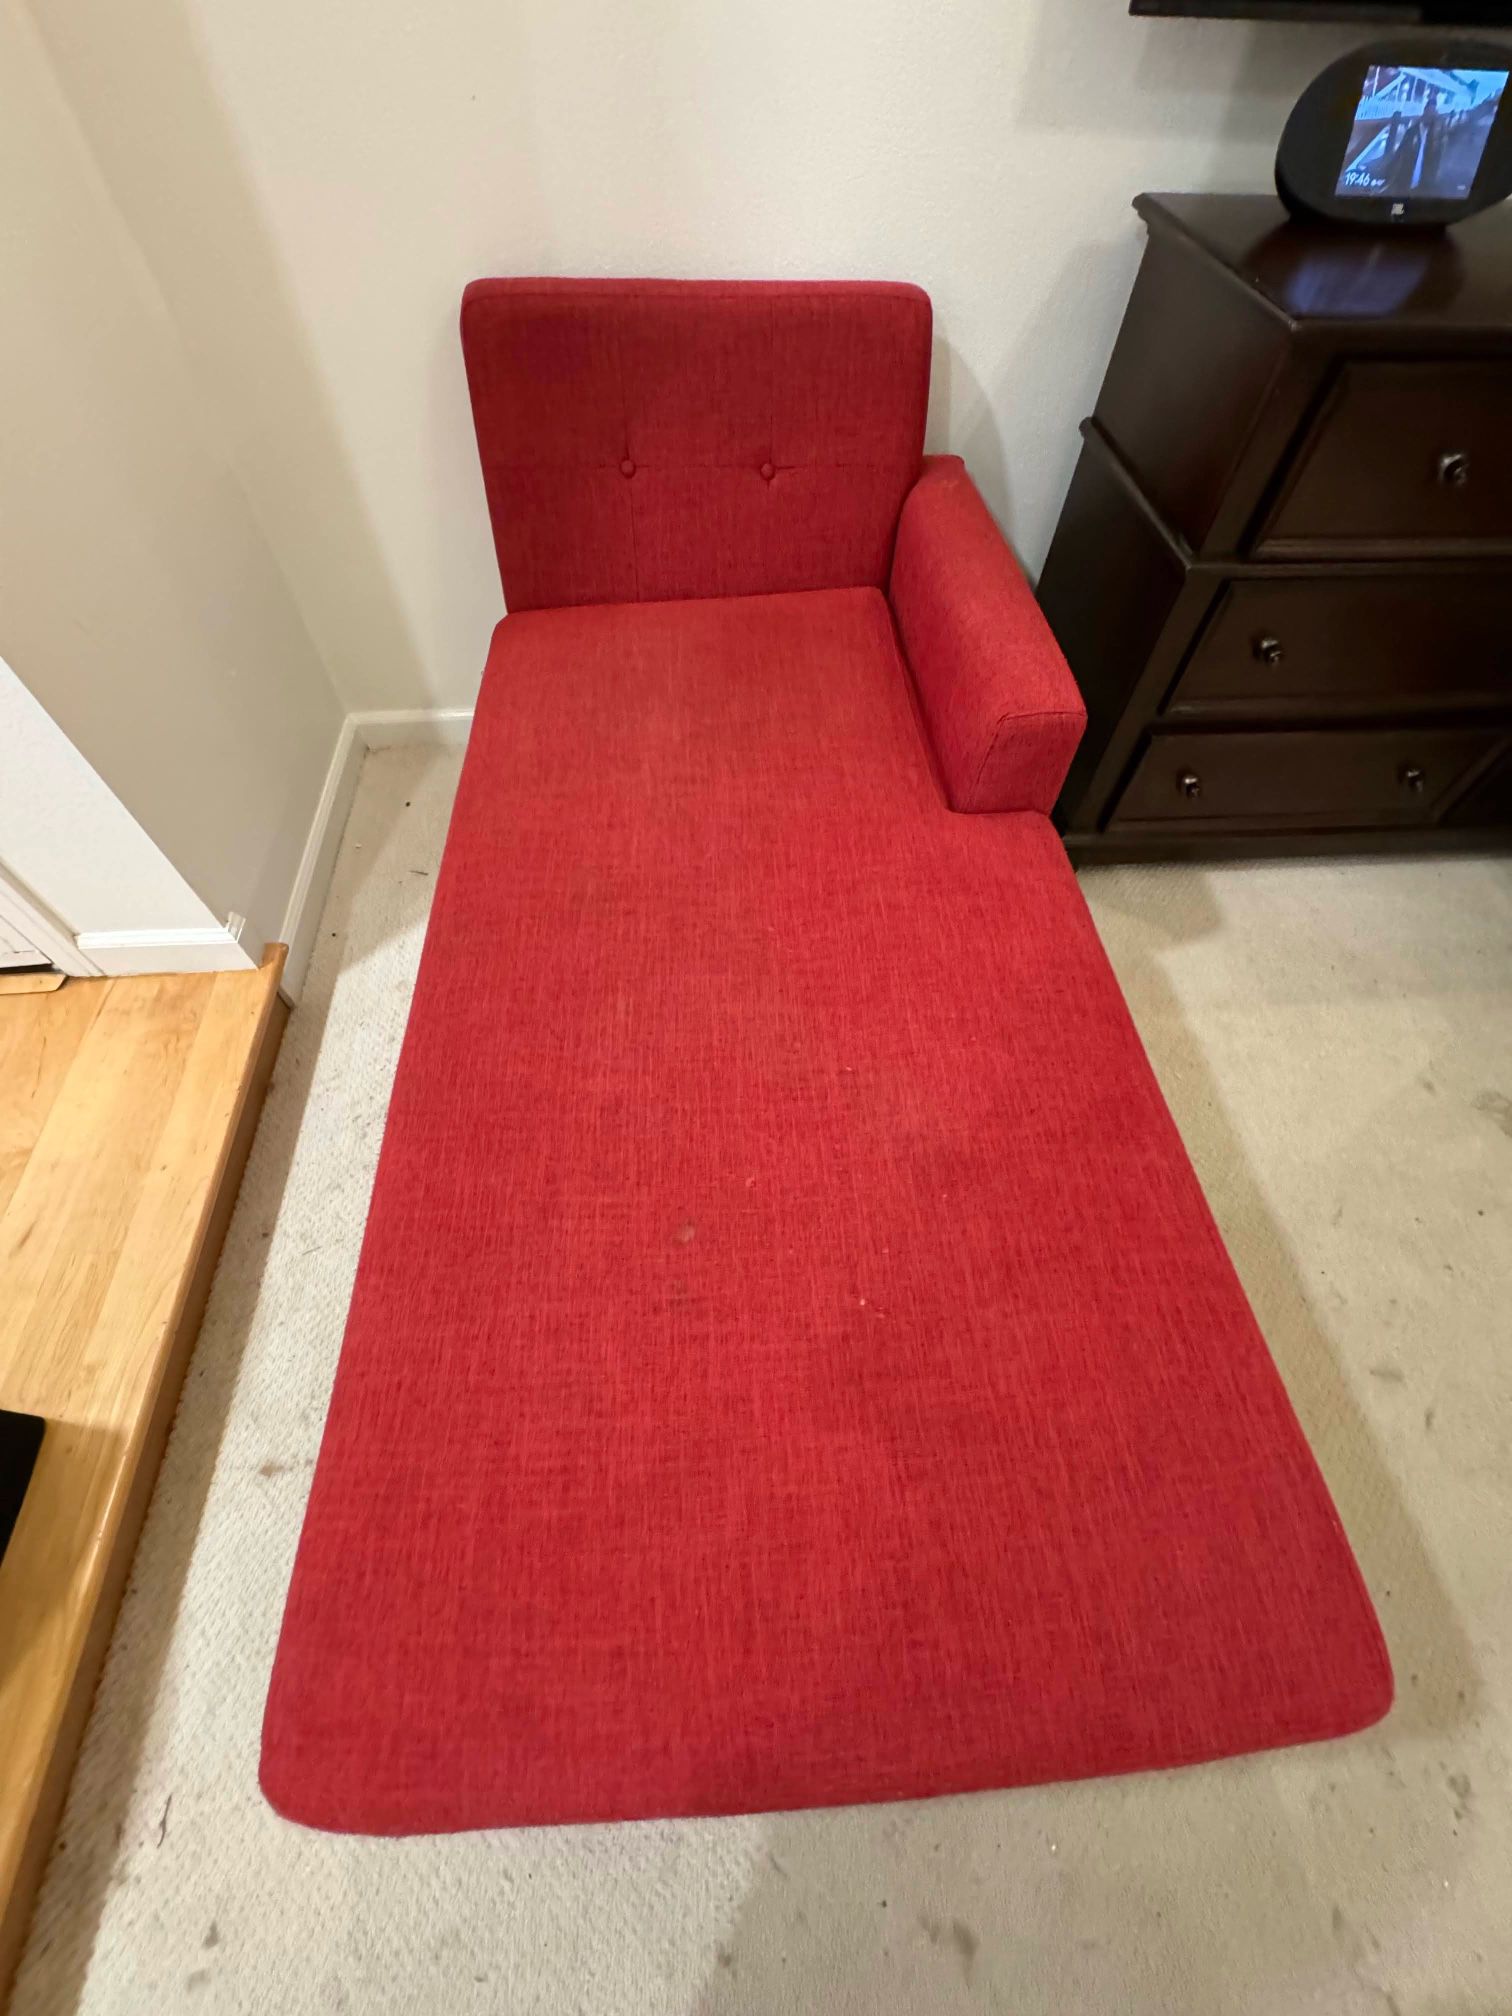 Stylish Mid-Century Modern Chaise Lounge - Add a Pop of Color to Your Space!